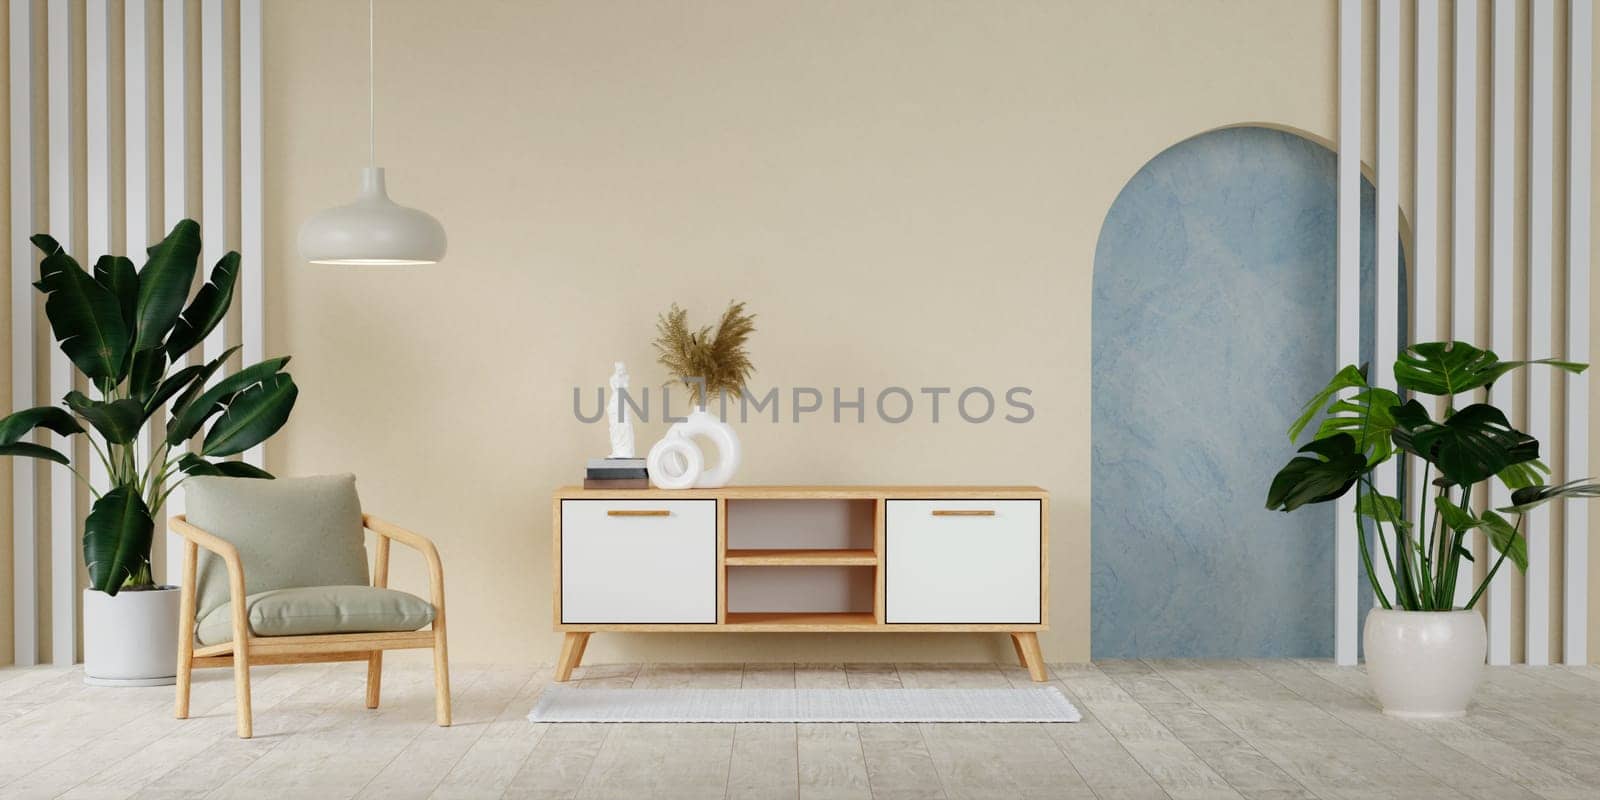 beige minimalist living room interior with cabinet chair and plant on a wooden floor. Home Nordic interior. Scandinavian interior poster mock up. 3D render illustration.